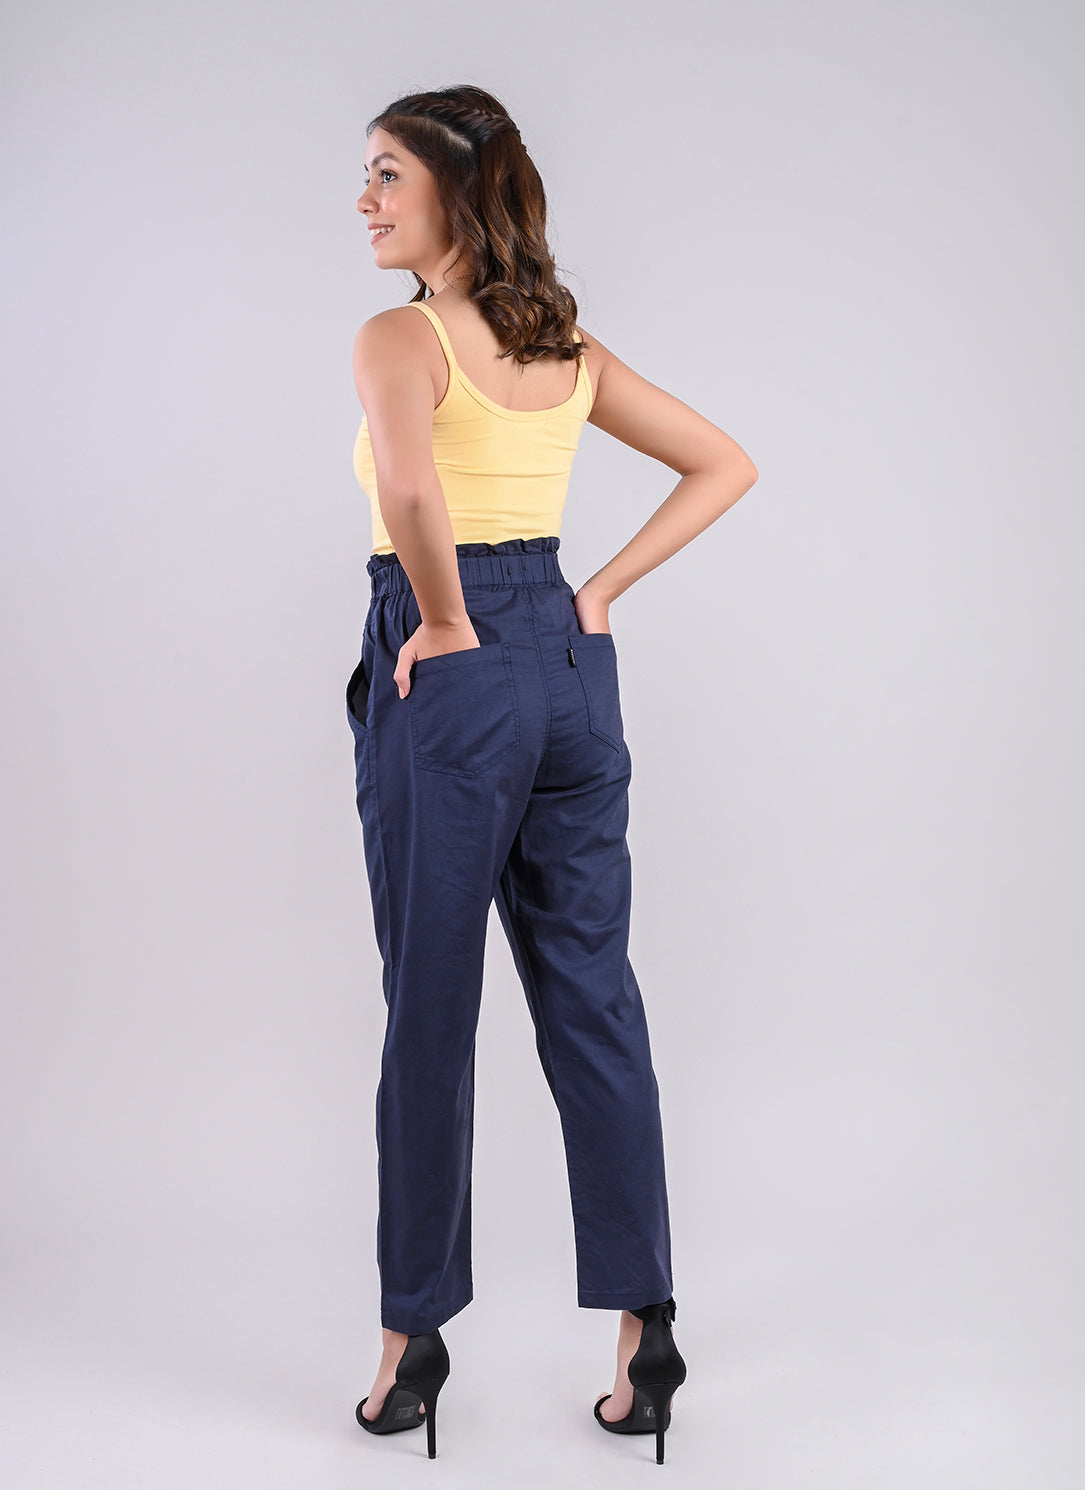 BREEZY PANTS IN NAVY WITH PAPERBAG WAIST